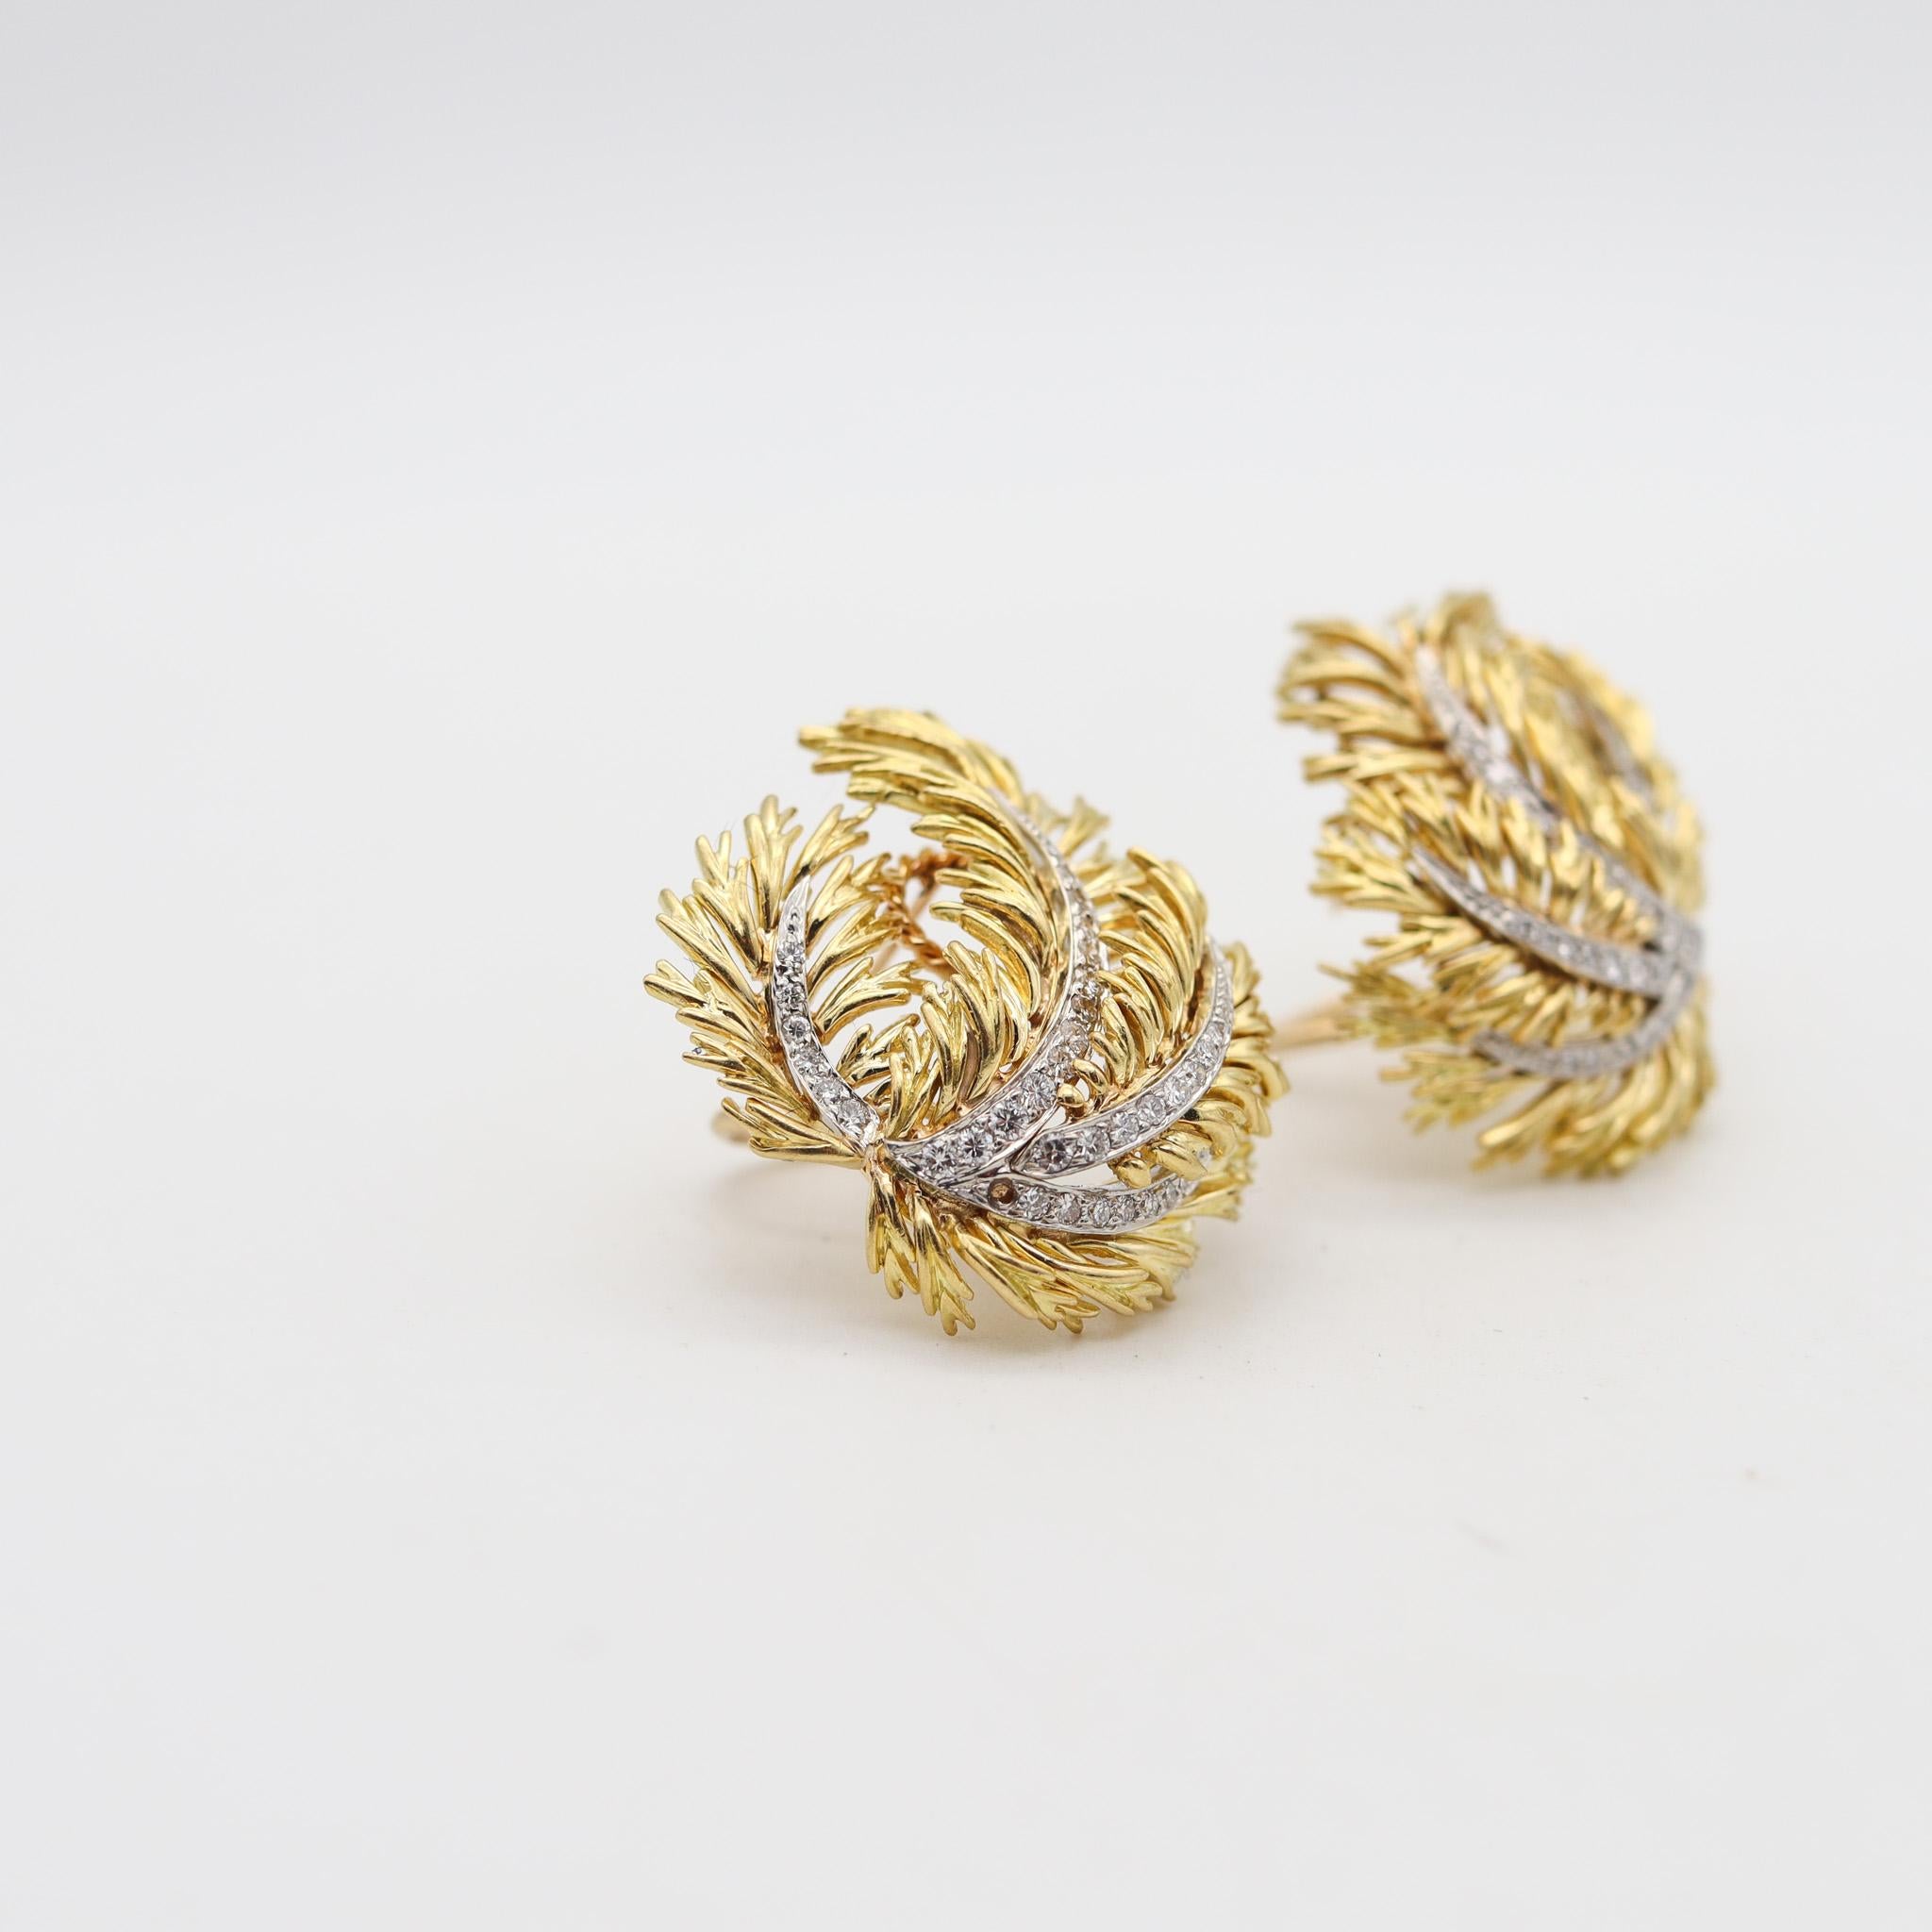 Modernist Cartier 1960 Clips Earrings In 18Kt Yellow Gold With 1.76 Ctw In VS Diamonds For Sale